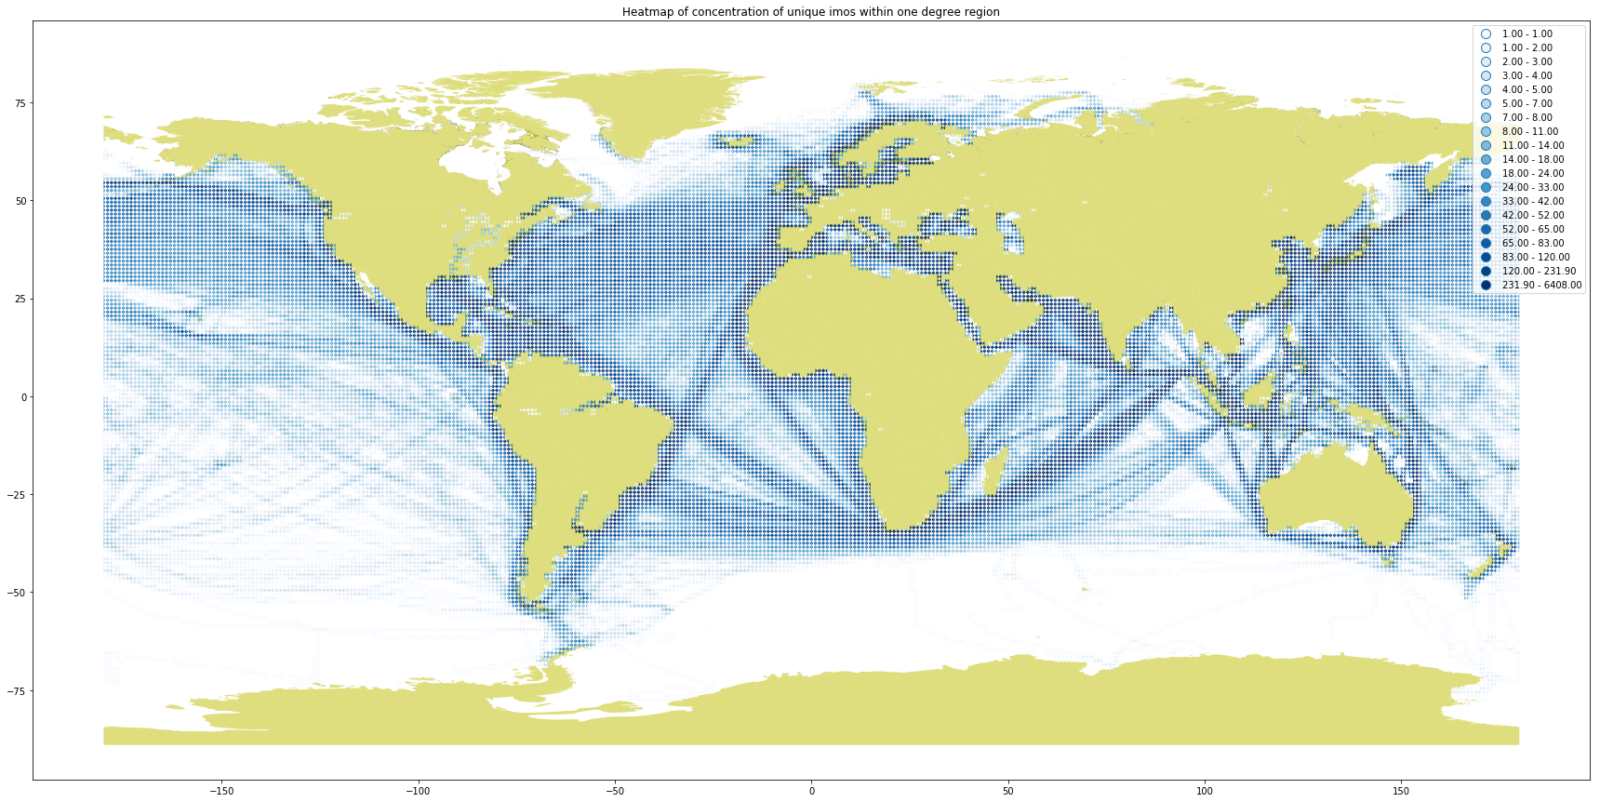 Density plot of global shipping acticity